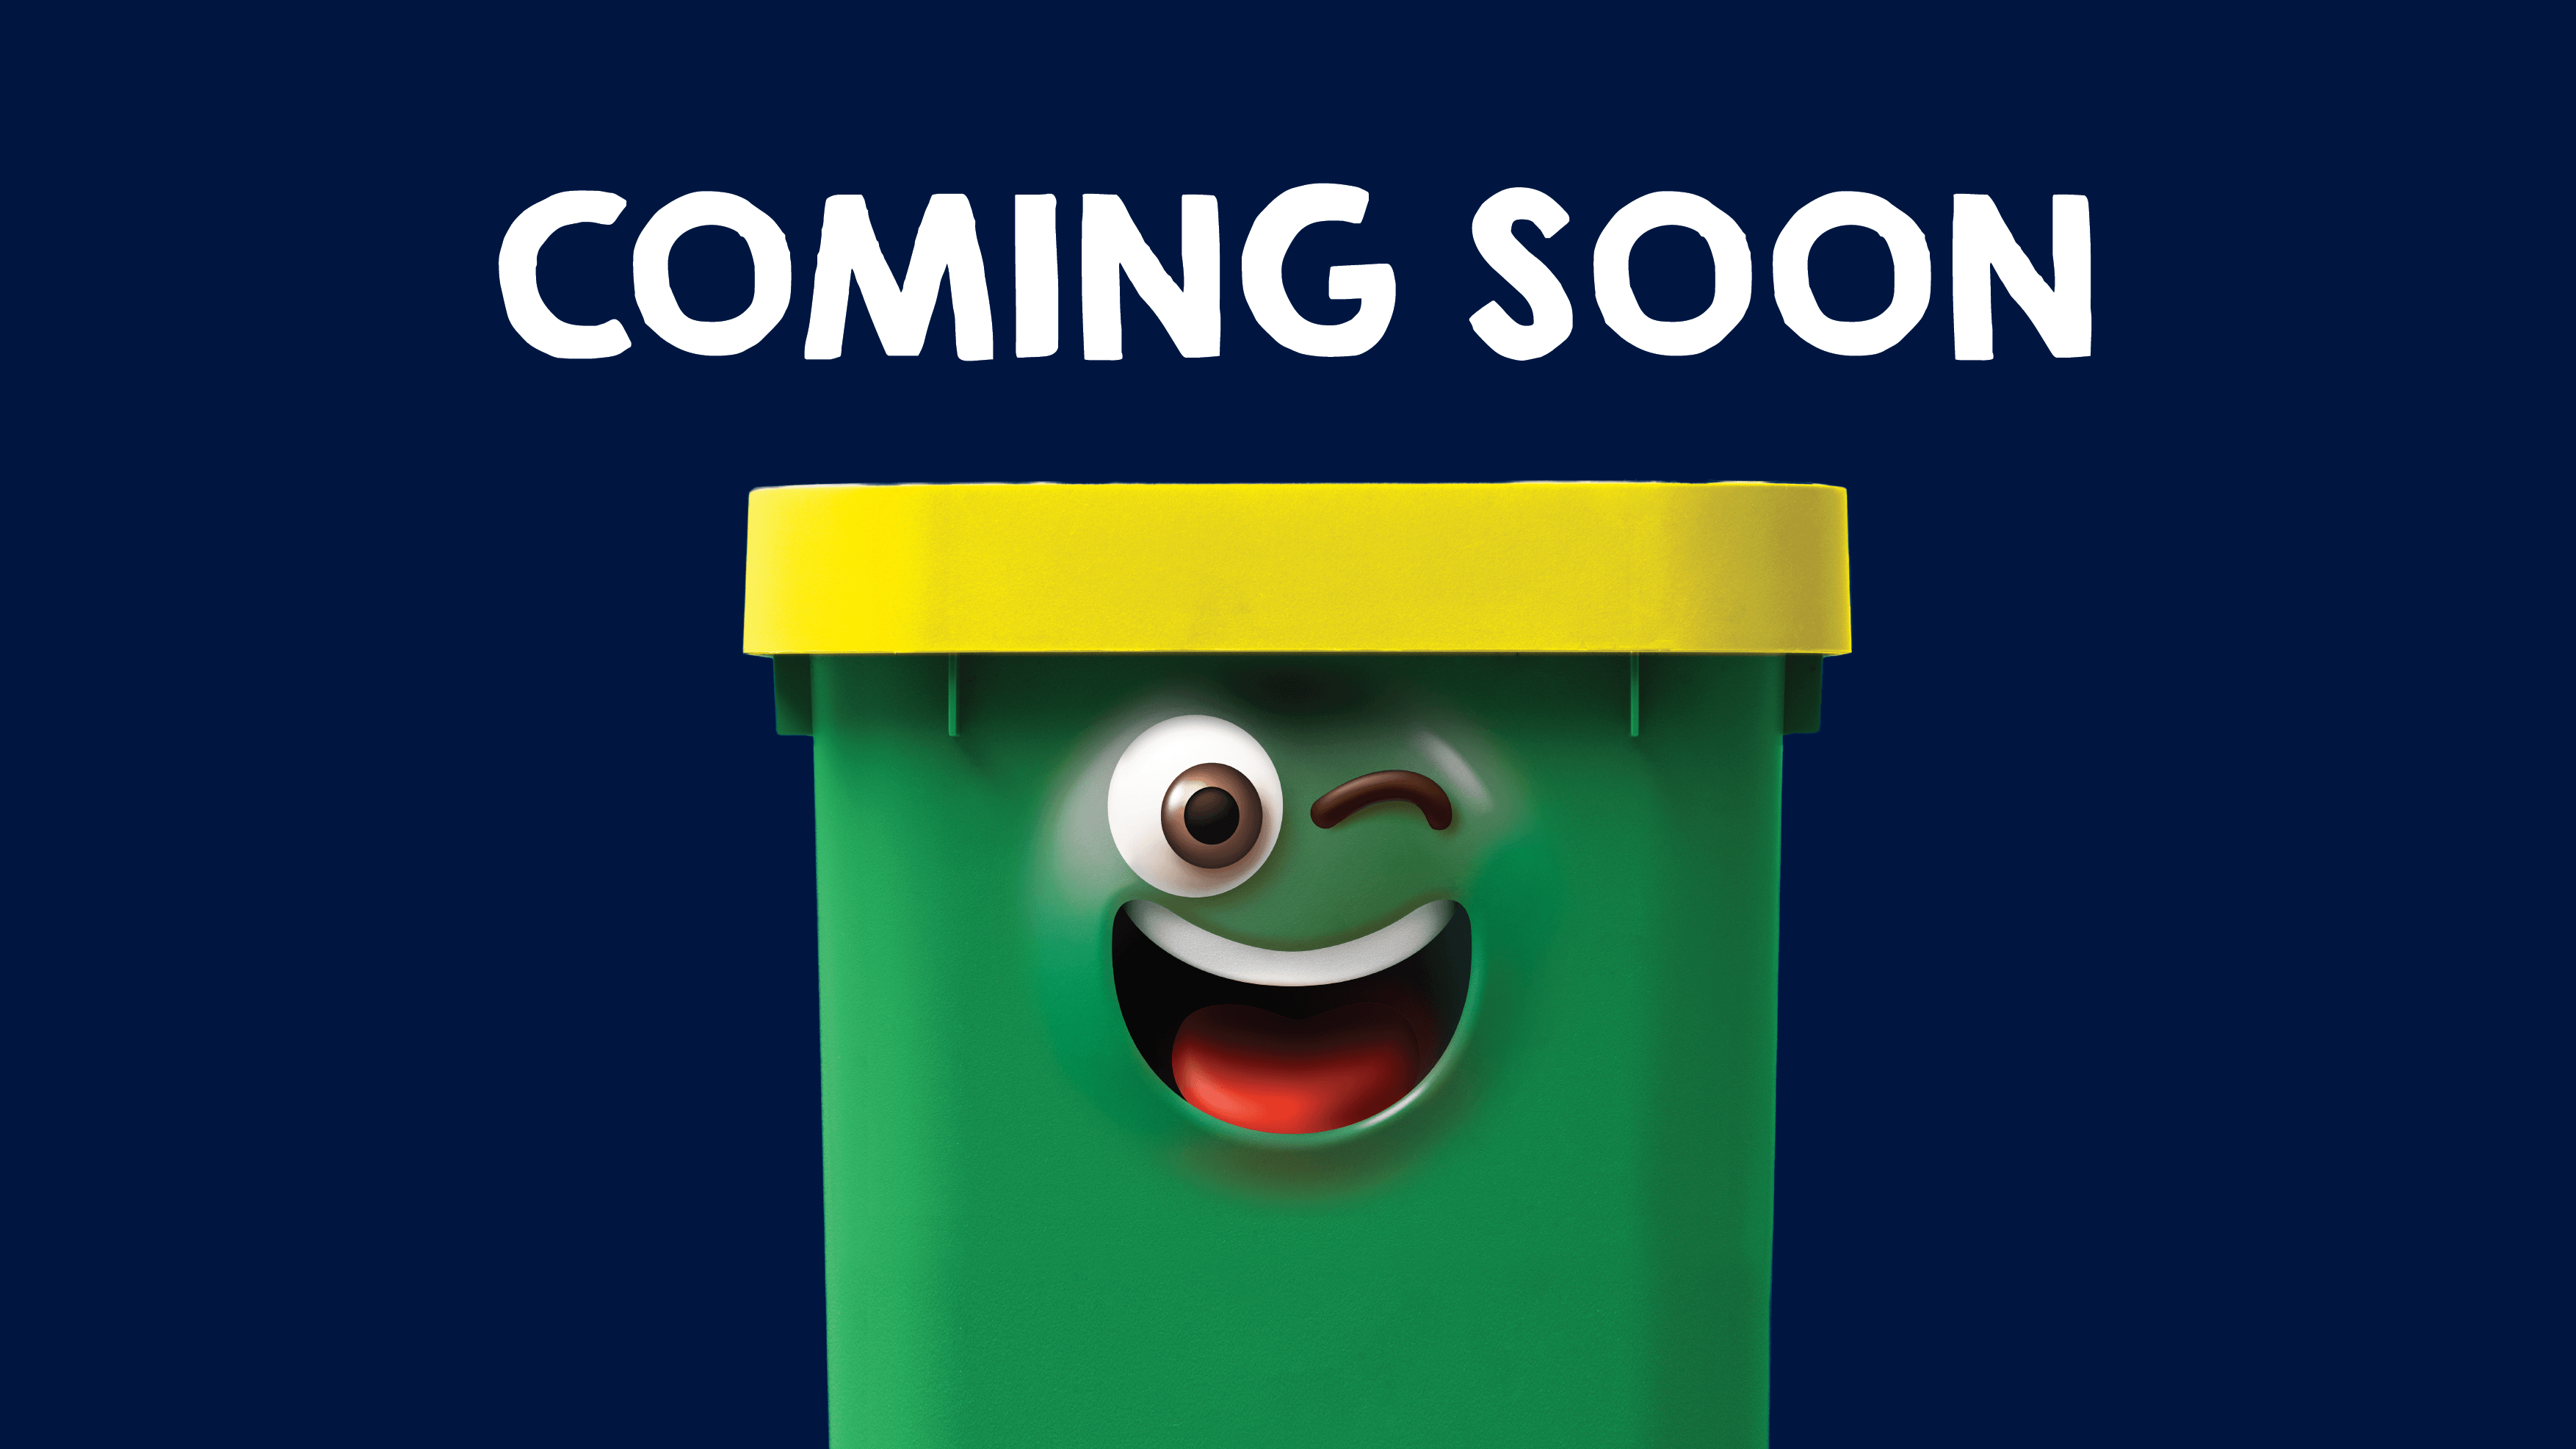 Recycling bin with face smiling with text coming soon